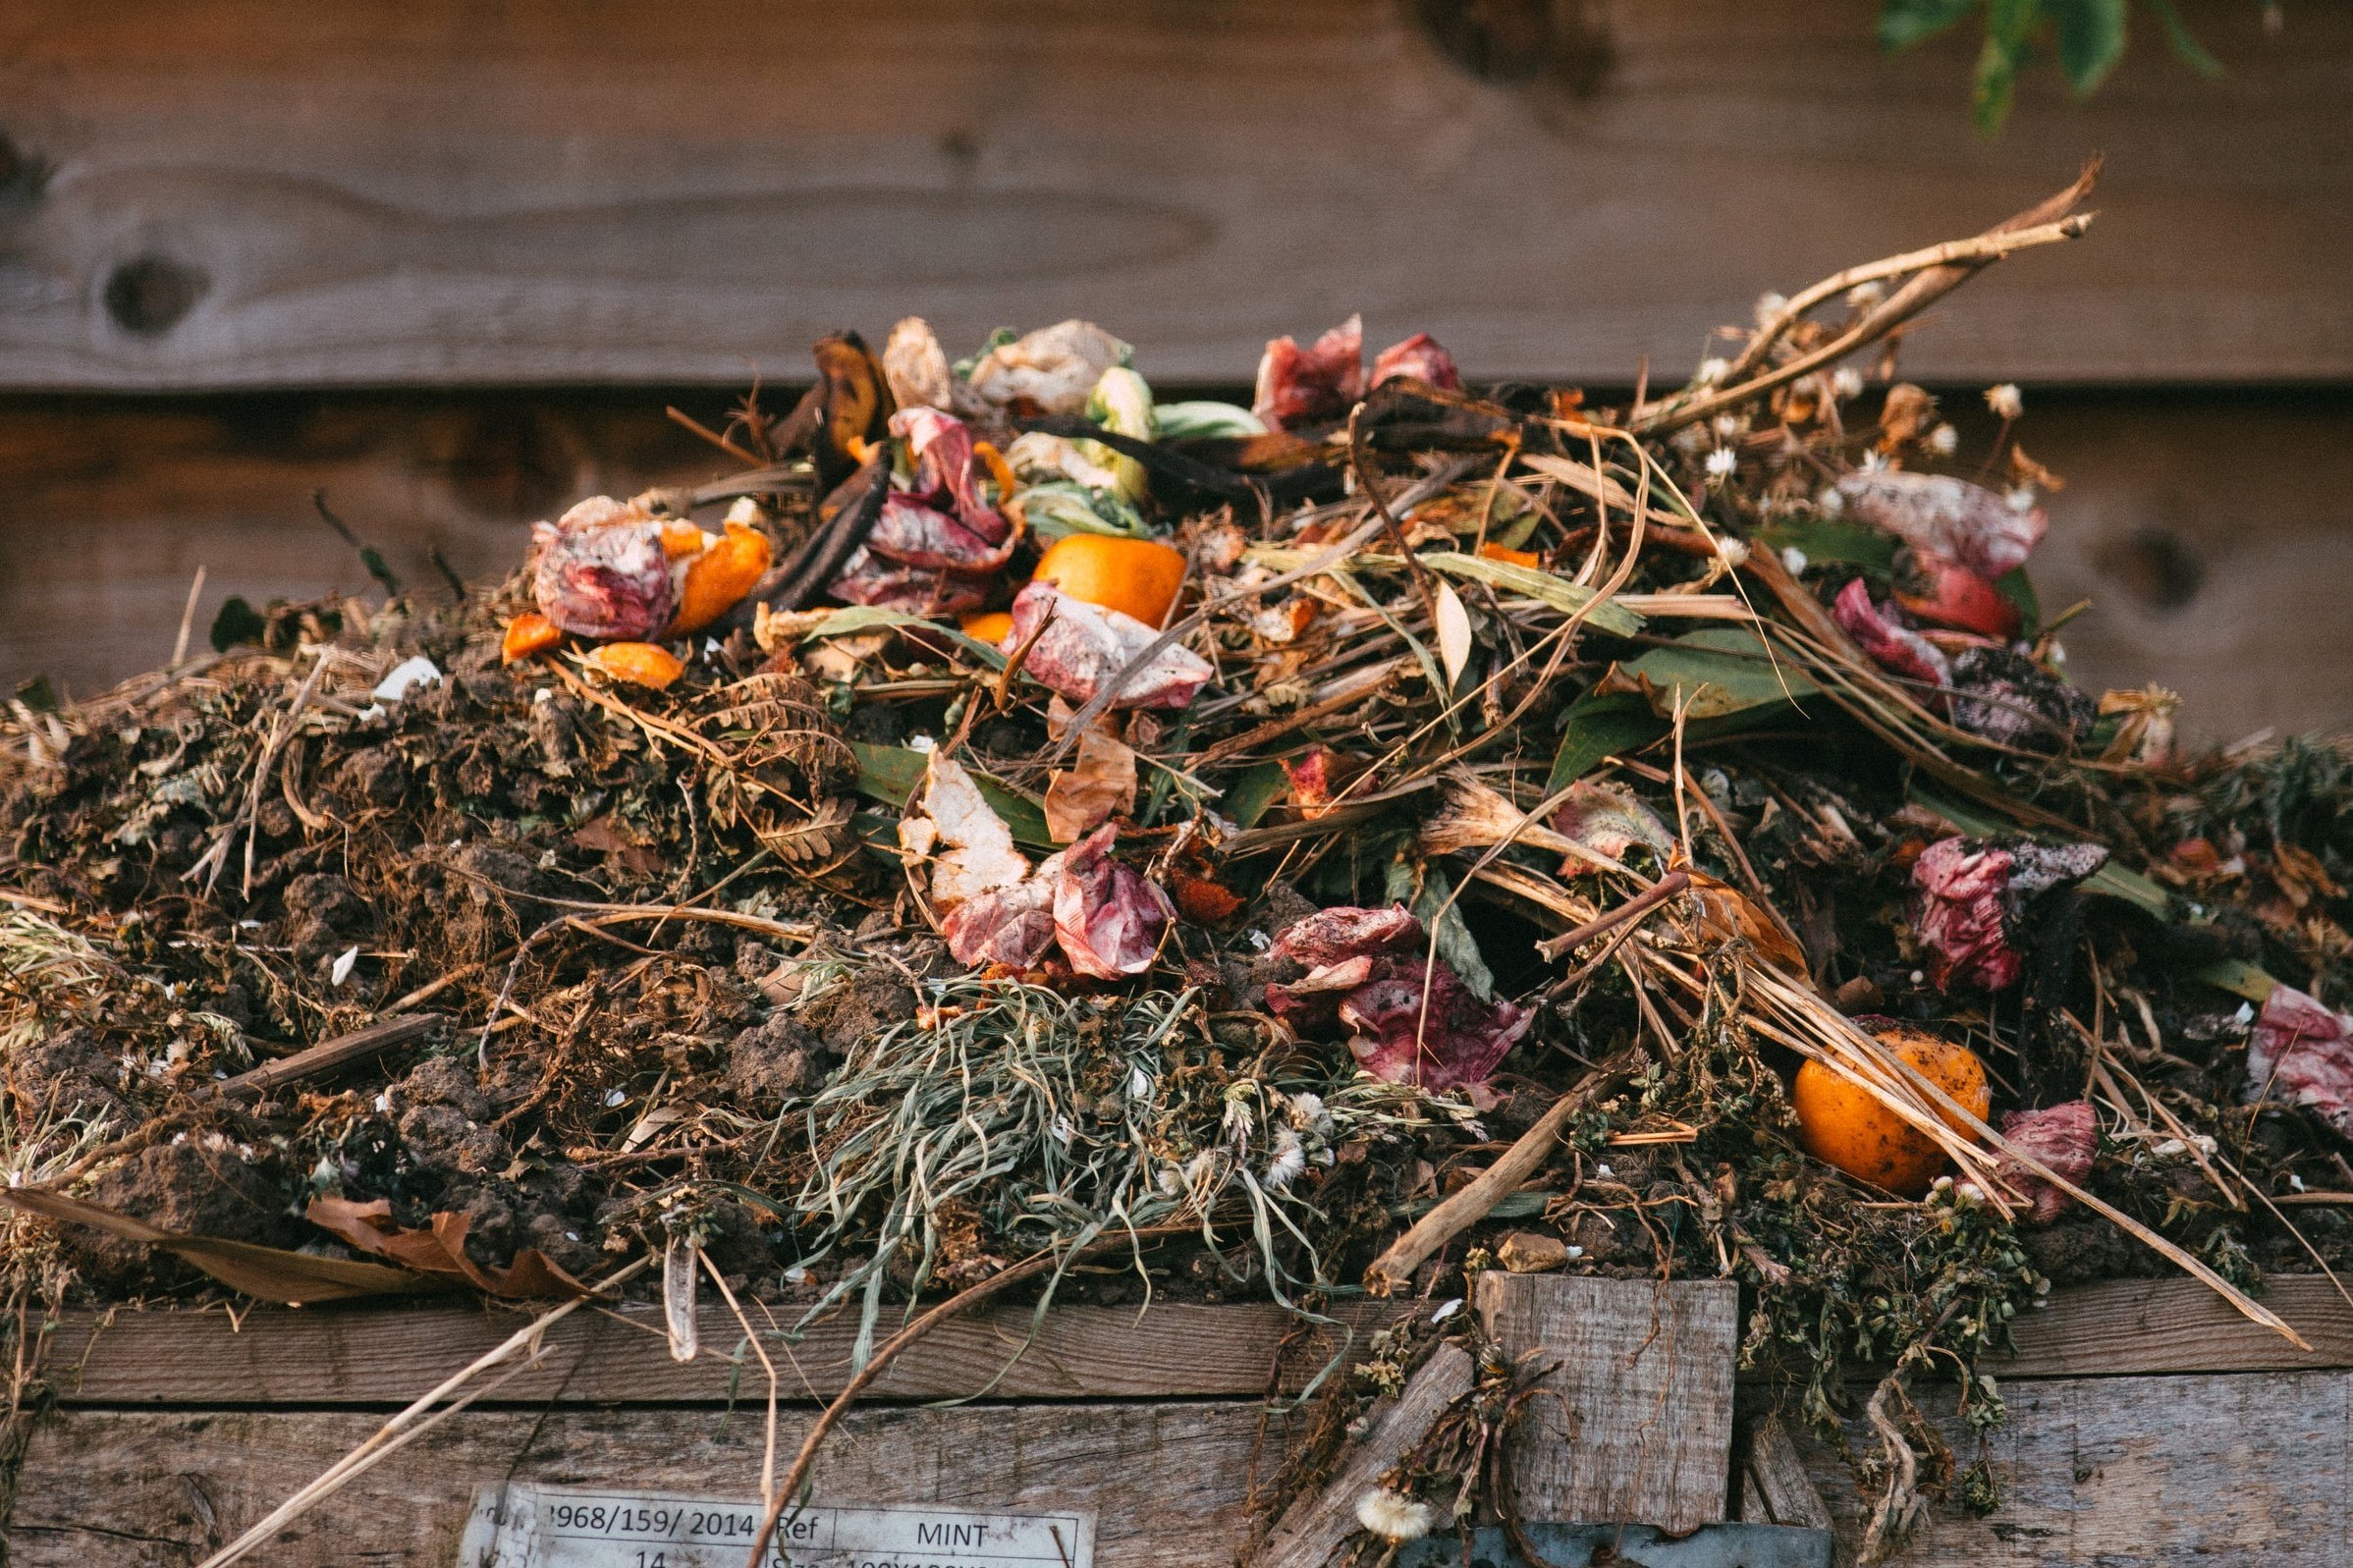 The Do's and Don'ts of Backyard Composting